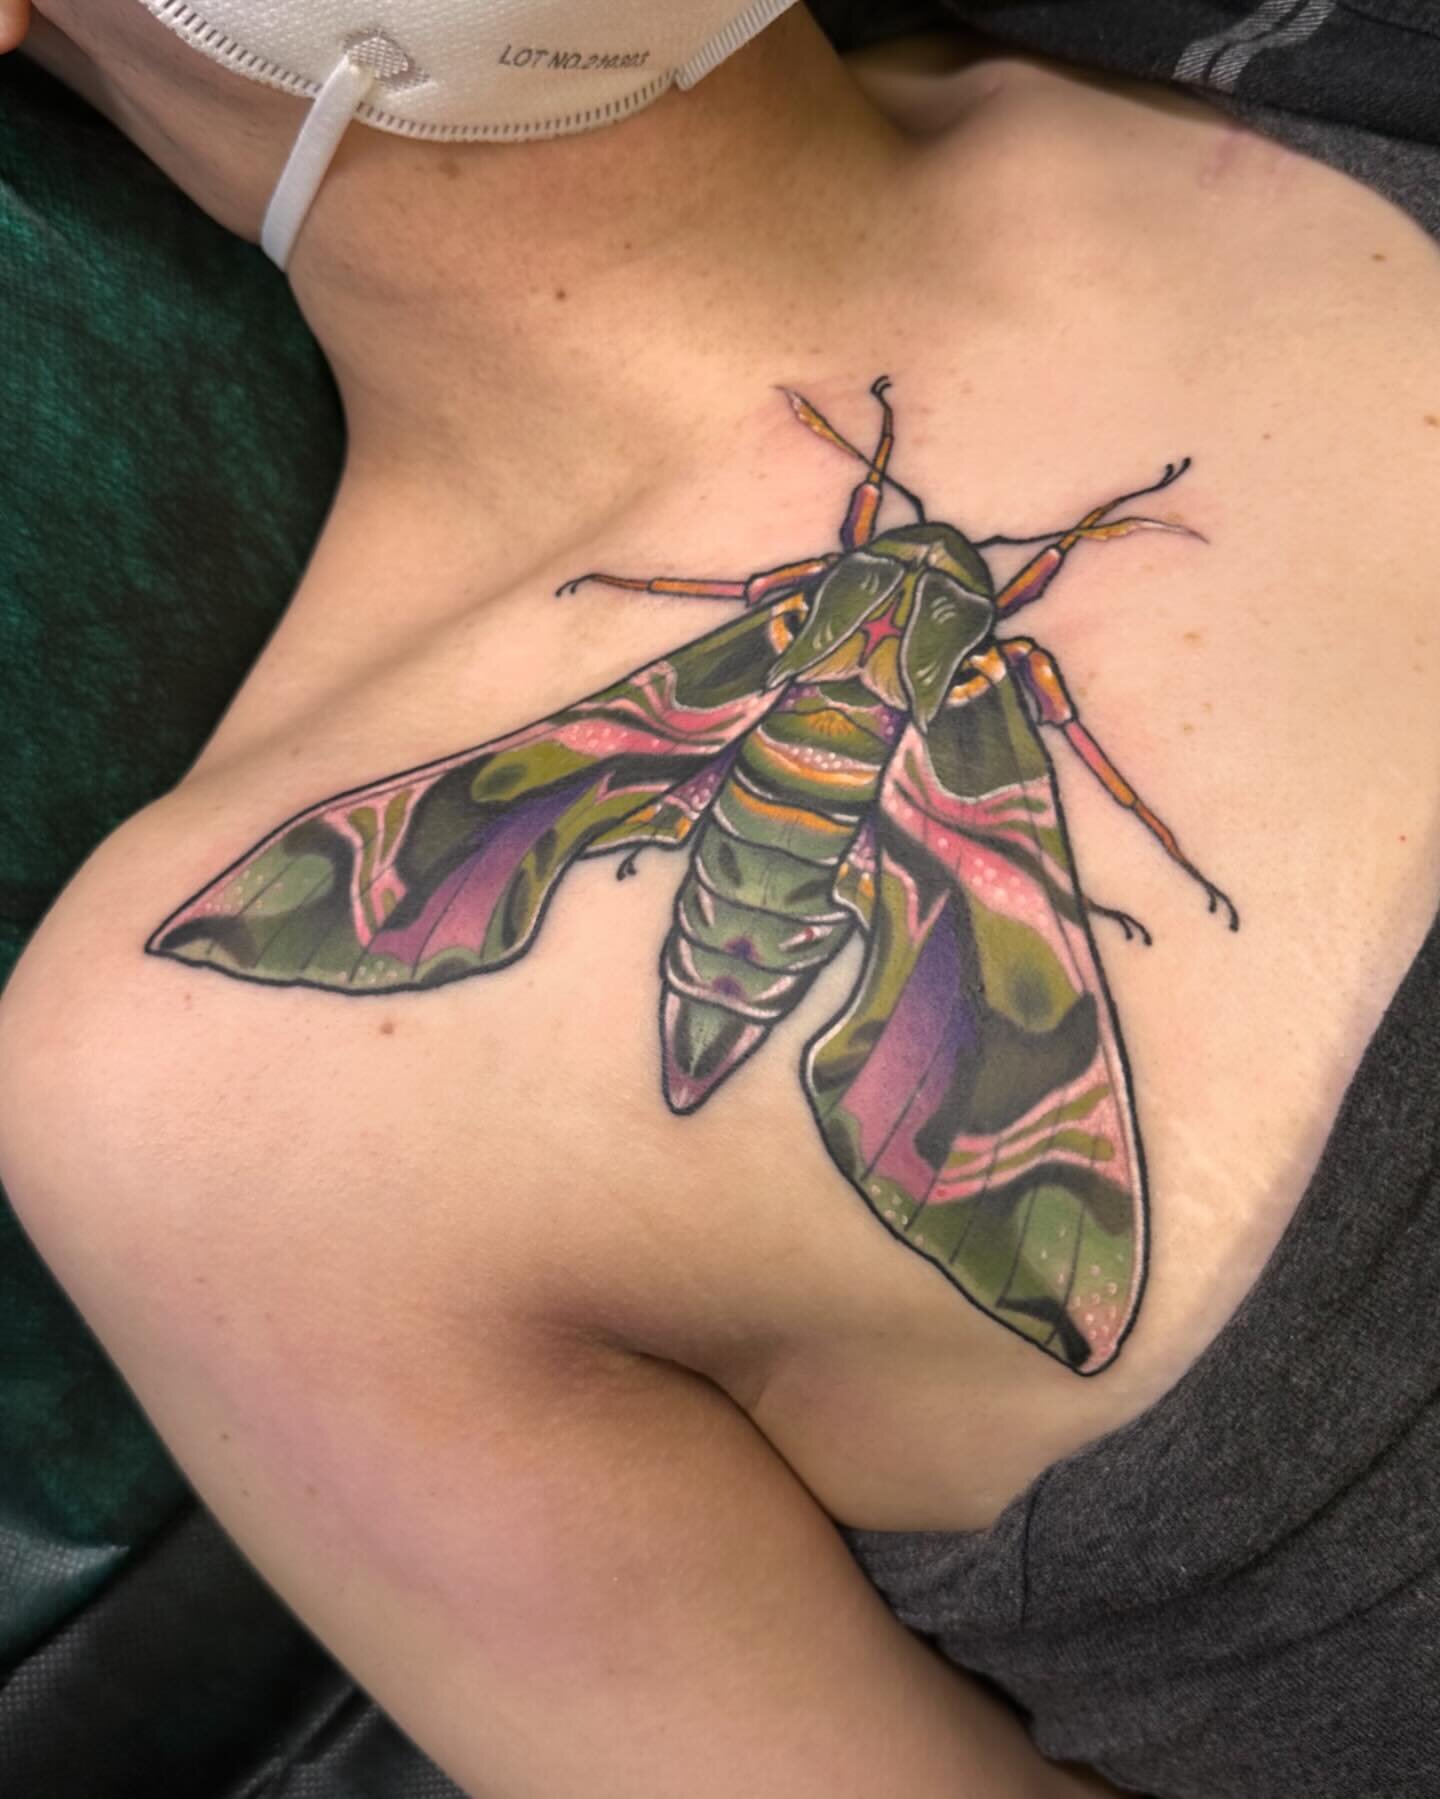 AAAALLLLL the photos of Kara&rsquo;s Oleander Hawk Moth chest piece because HOLY COW am I obsessed!!
(With Kara &amp; with the tattoos we make💕)
The placement/size of this just makes my brain go brrr and I would love to do more like it!
This took 3 